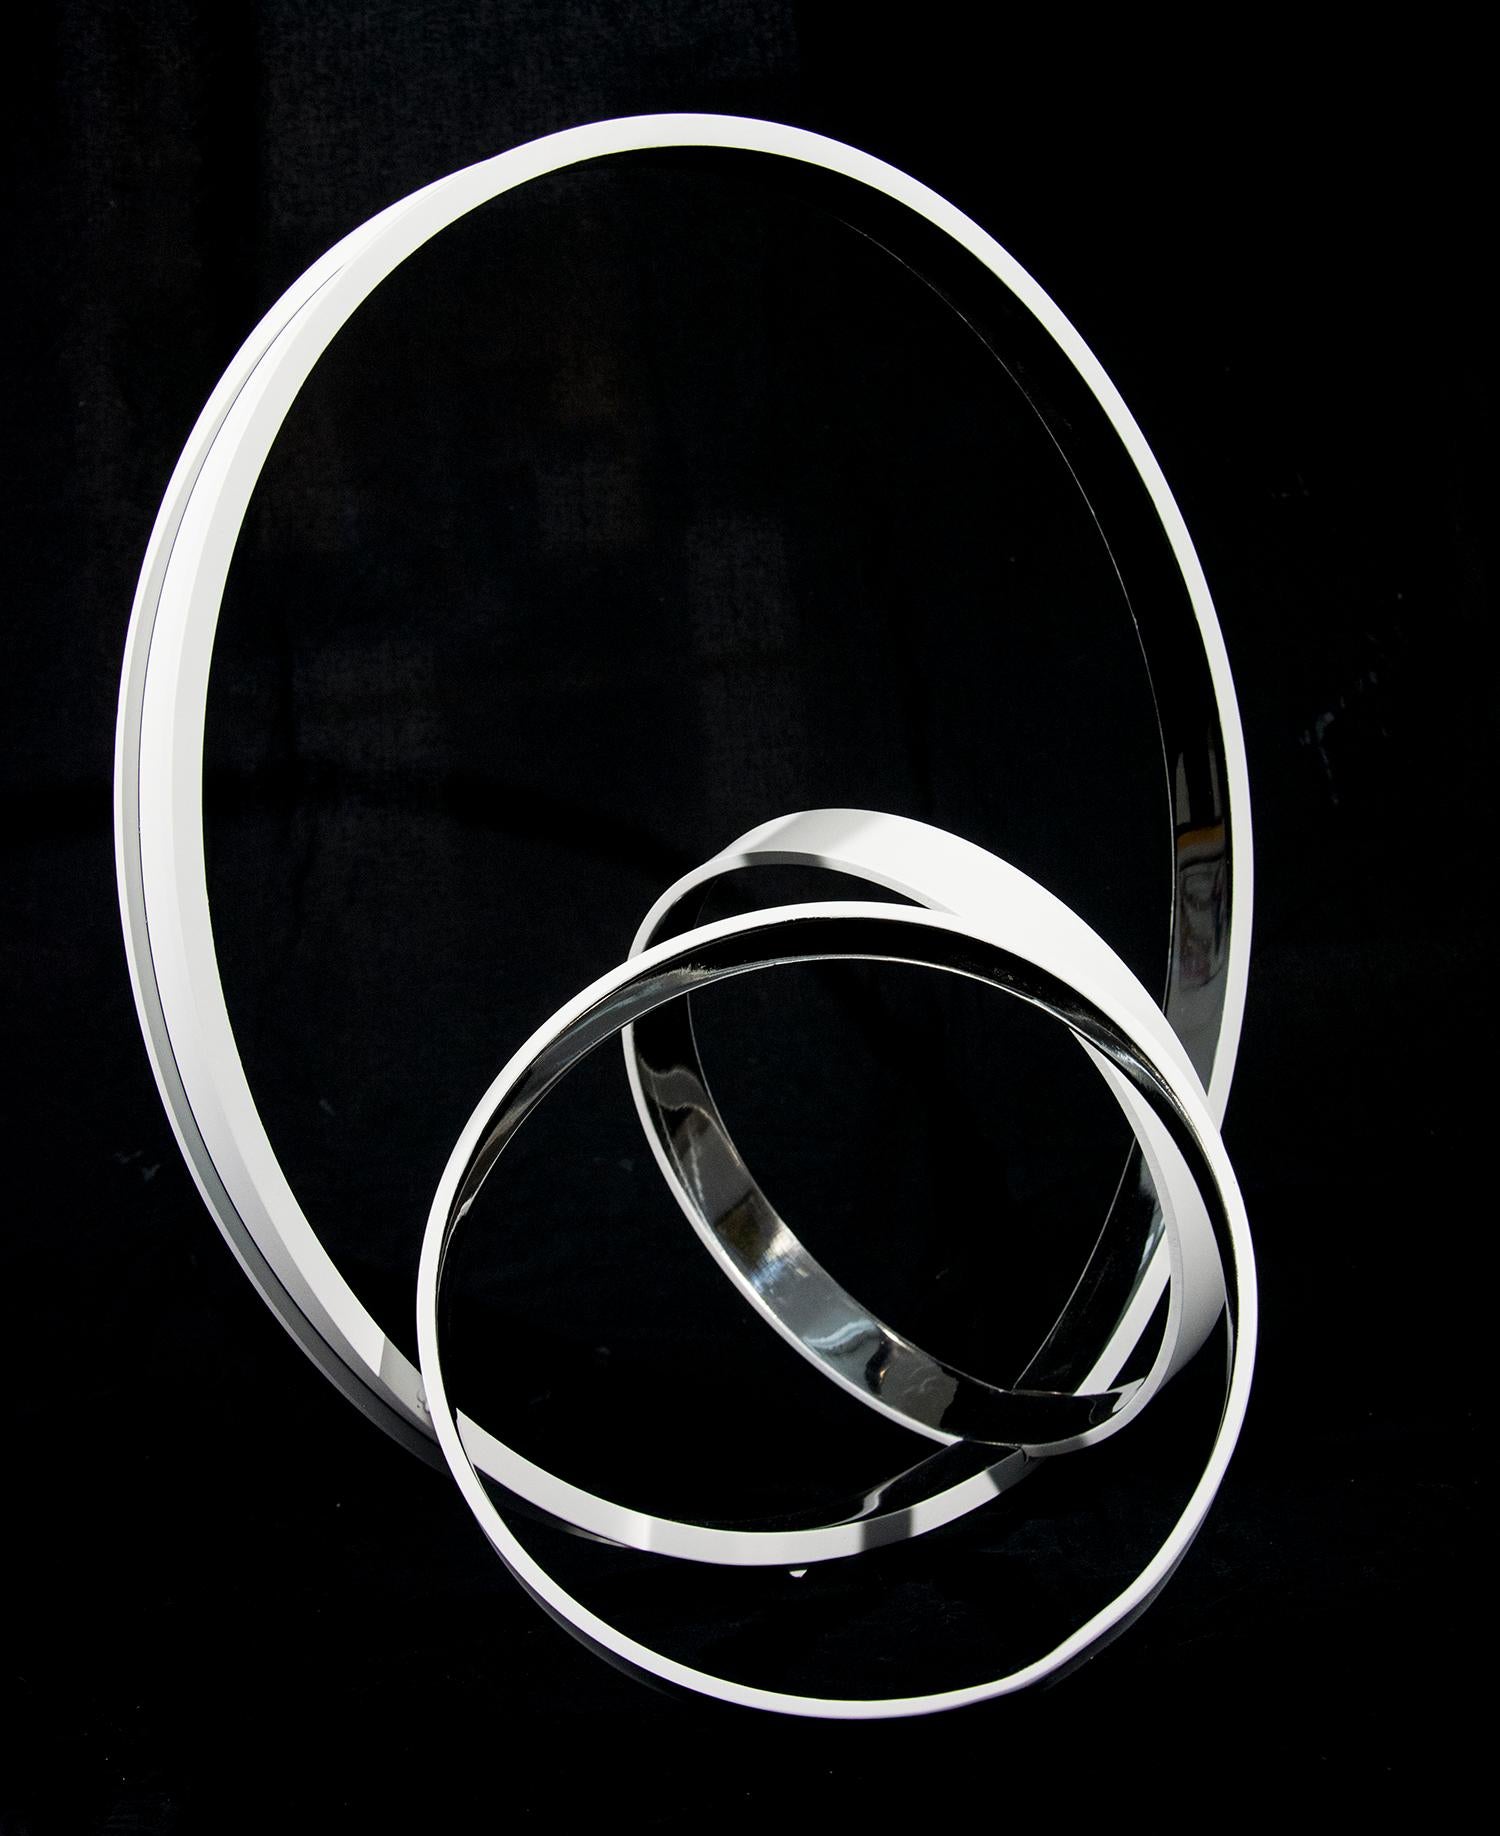 Rings of stainless steel, polished to a high sheen on the exterior and matte white on the interior, intersect at dynamic angles in this elegant sculpture by Philippe Pallafray. His work is designed to represent the duality of nature and the